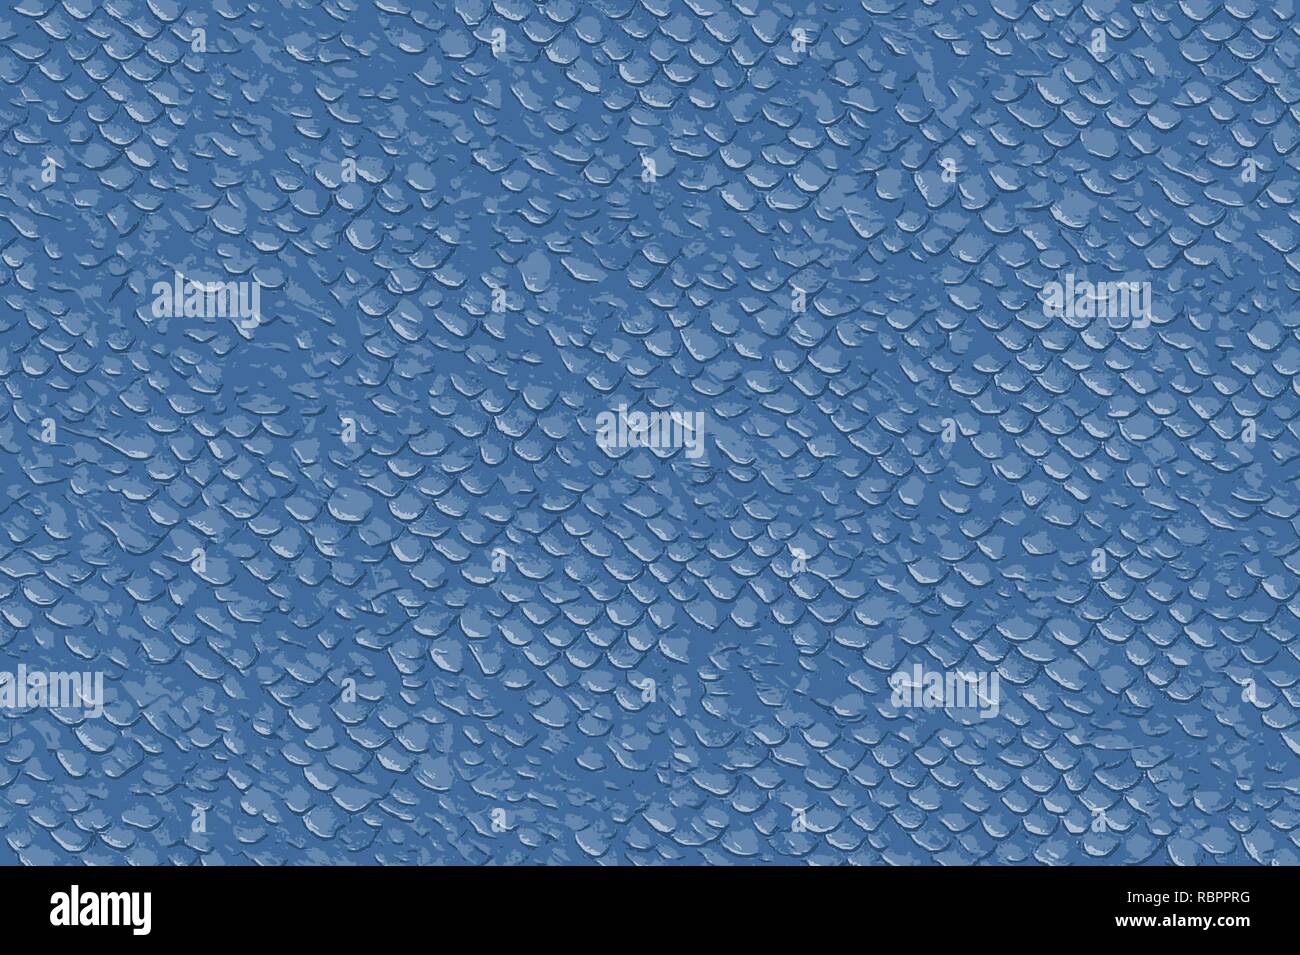 Blue fish or lezard scales for a seamless textured background Stock Photo